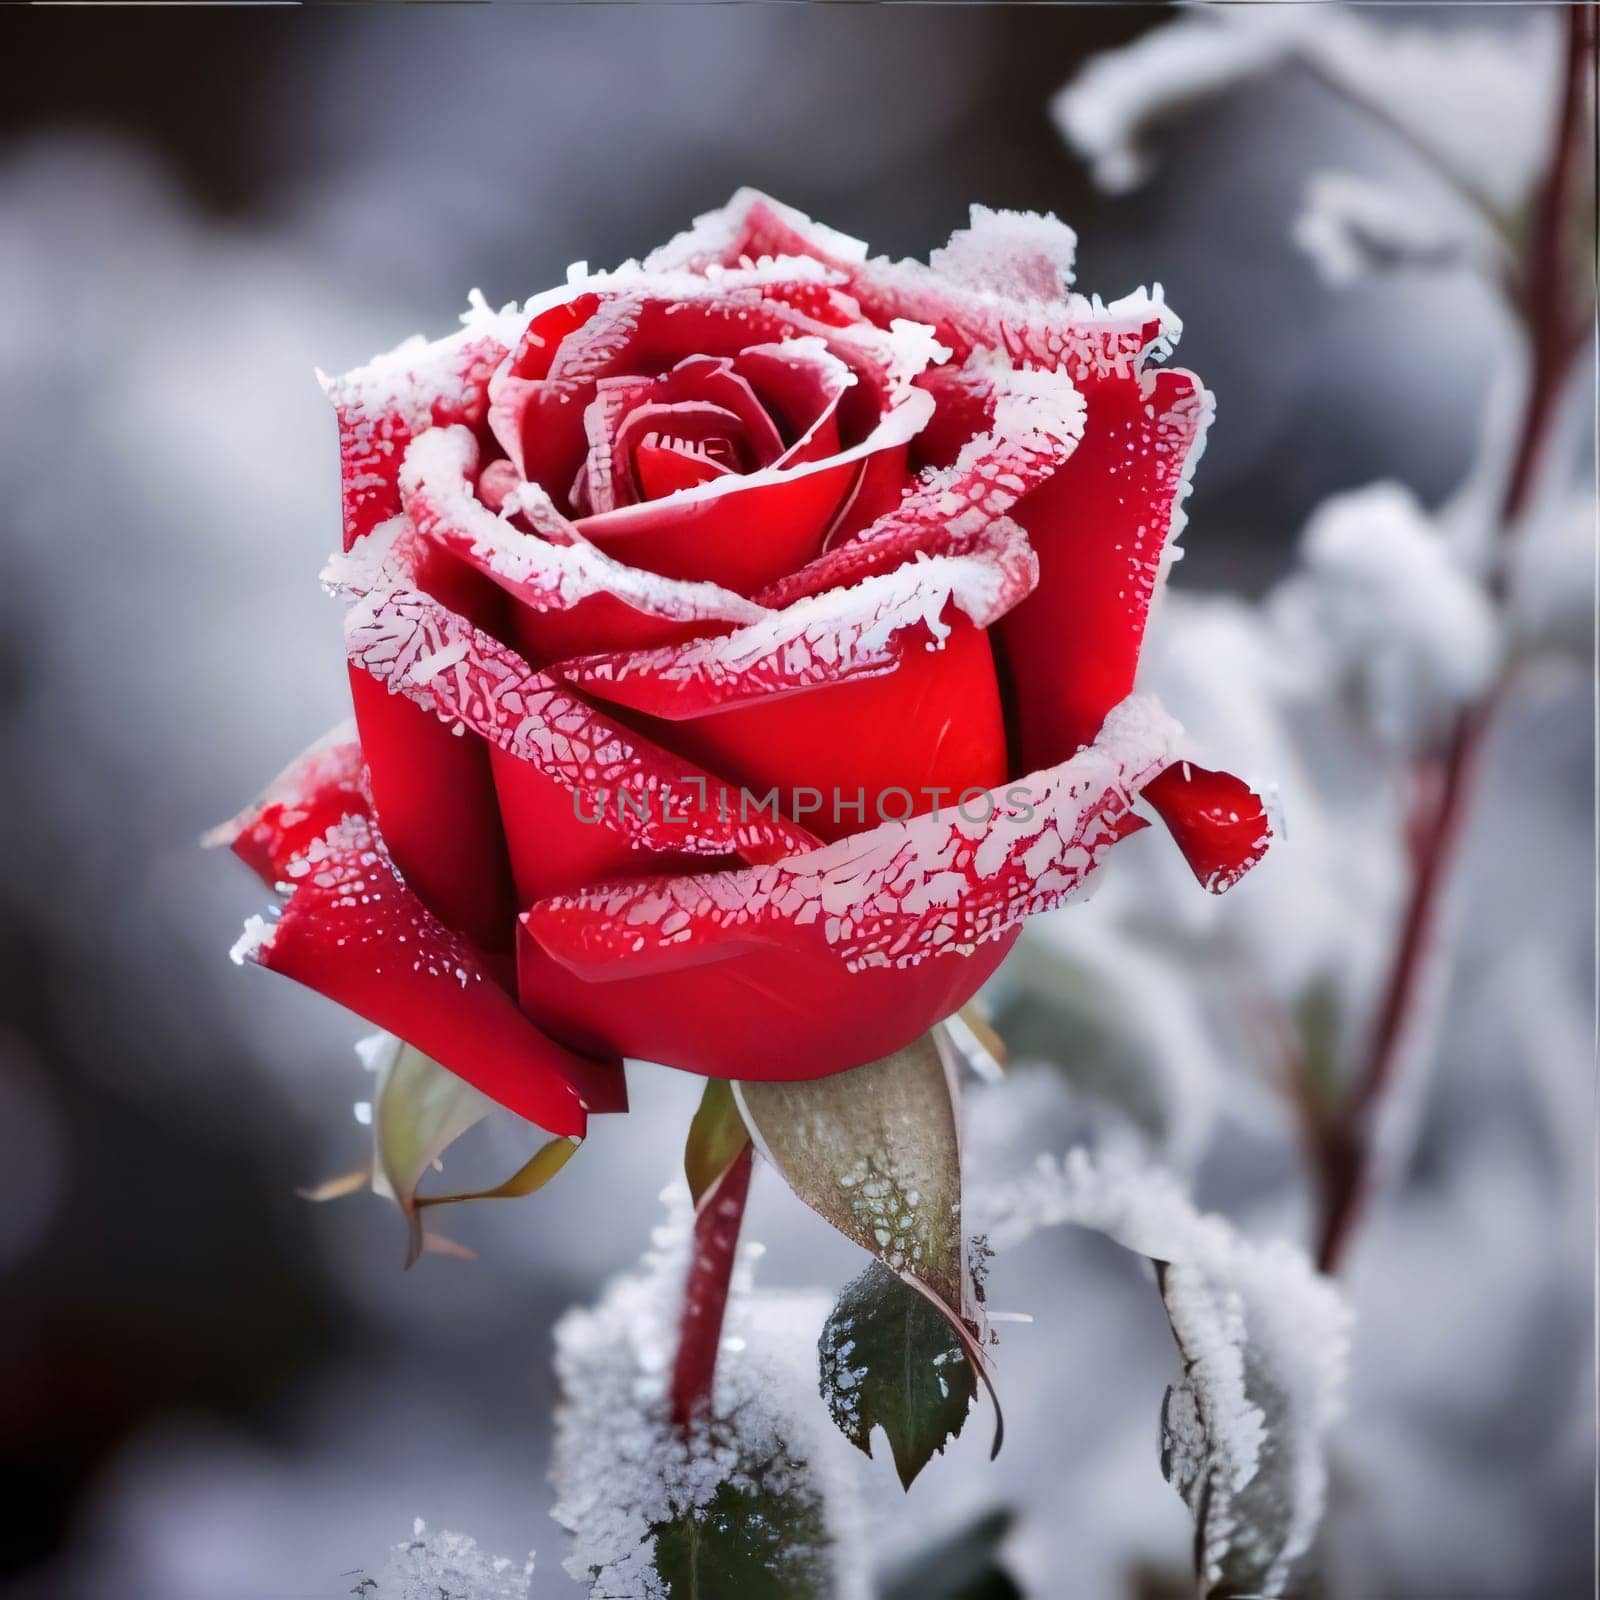 Red rose flower sprinkled with white snow, smudged background of winter. Flowering flowers, a symbol of spring, new life. by ThemesS